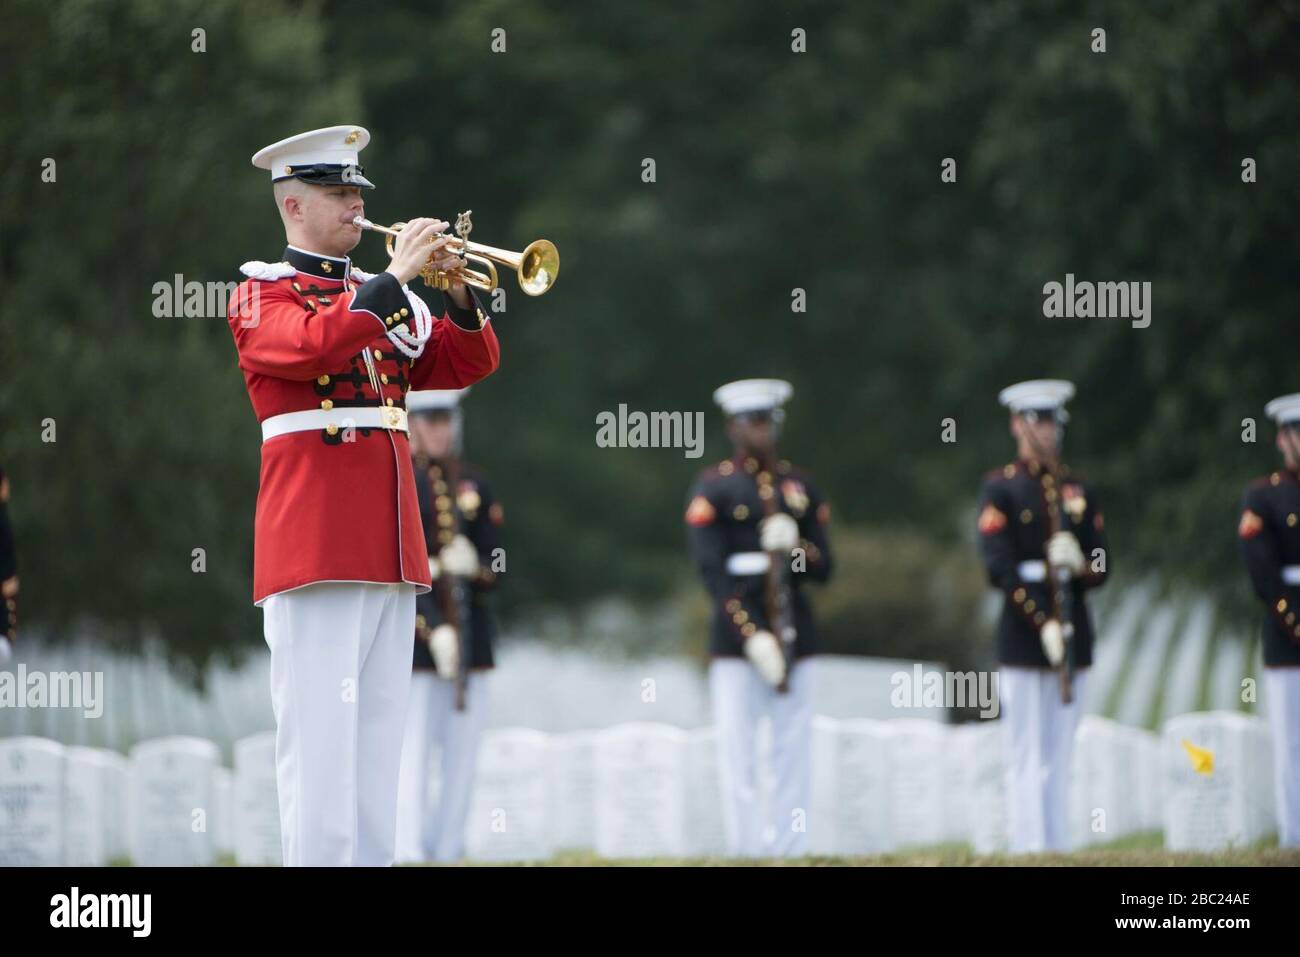 Graveside service for U.S. Marine Corps Pfc. Anthony Brozyna in Section 60 of Arlington National Cemetery (29367171045). Stock Photo